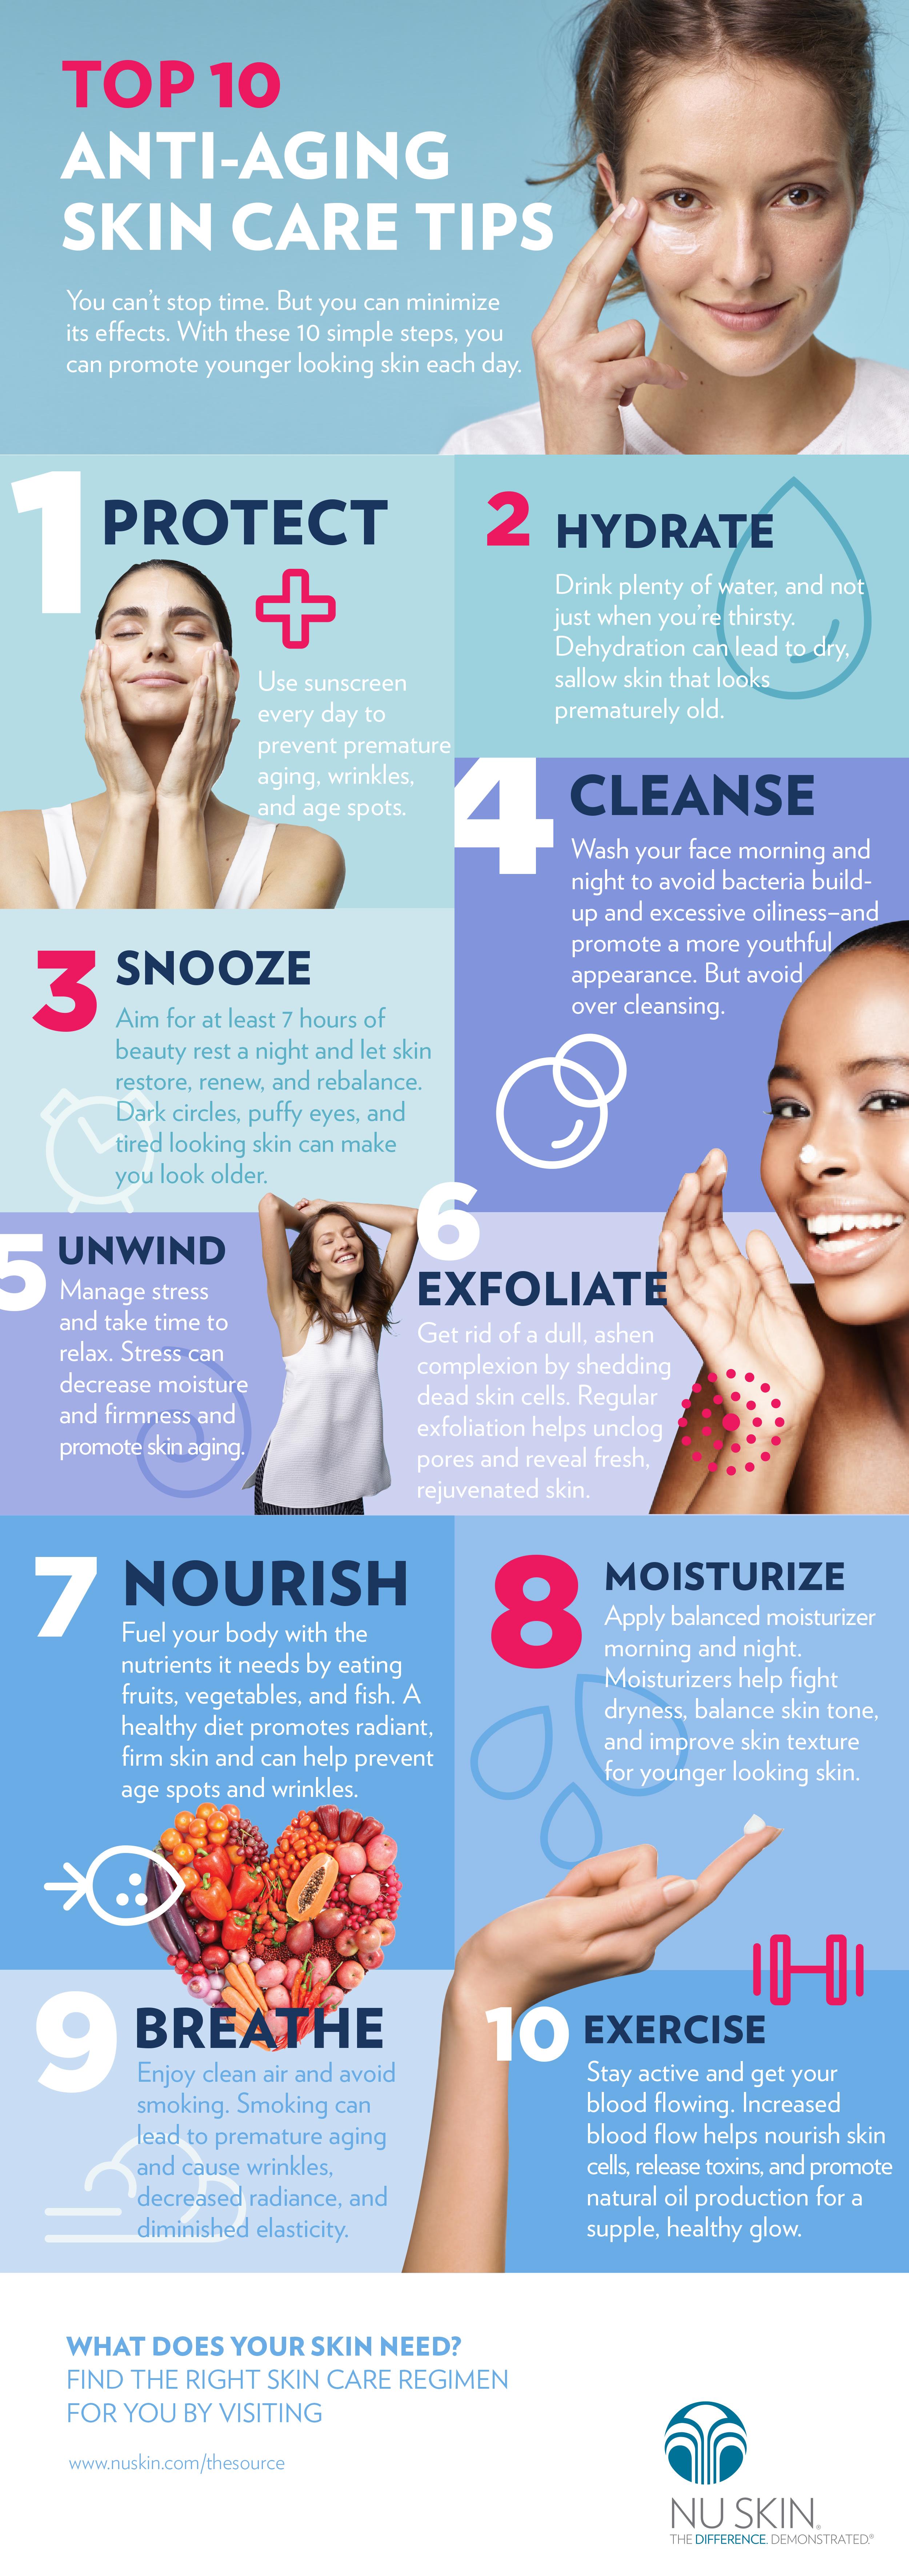 ageloc-me-top-10-anti-aging-skin-care-tips-infographic.jpg